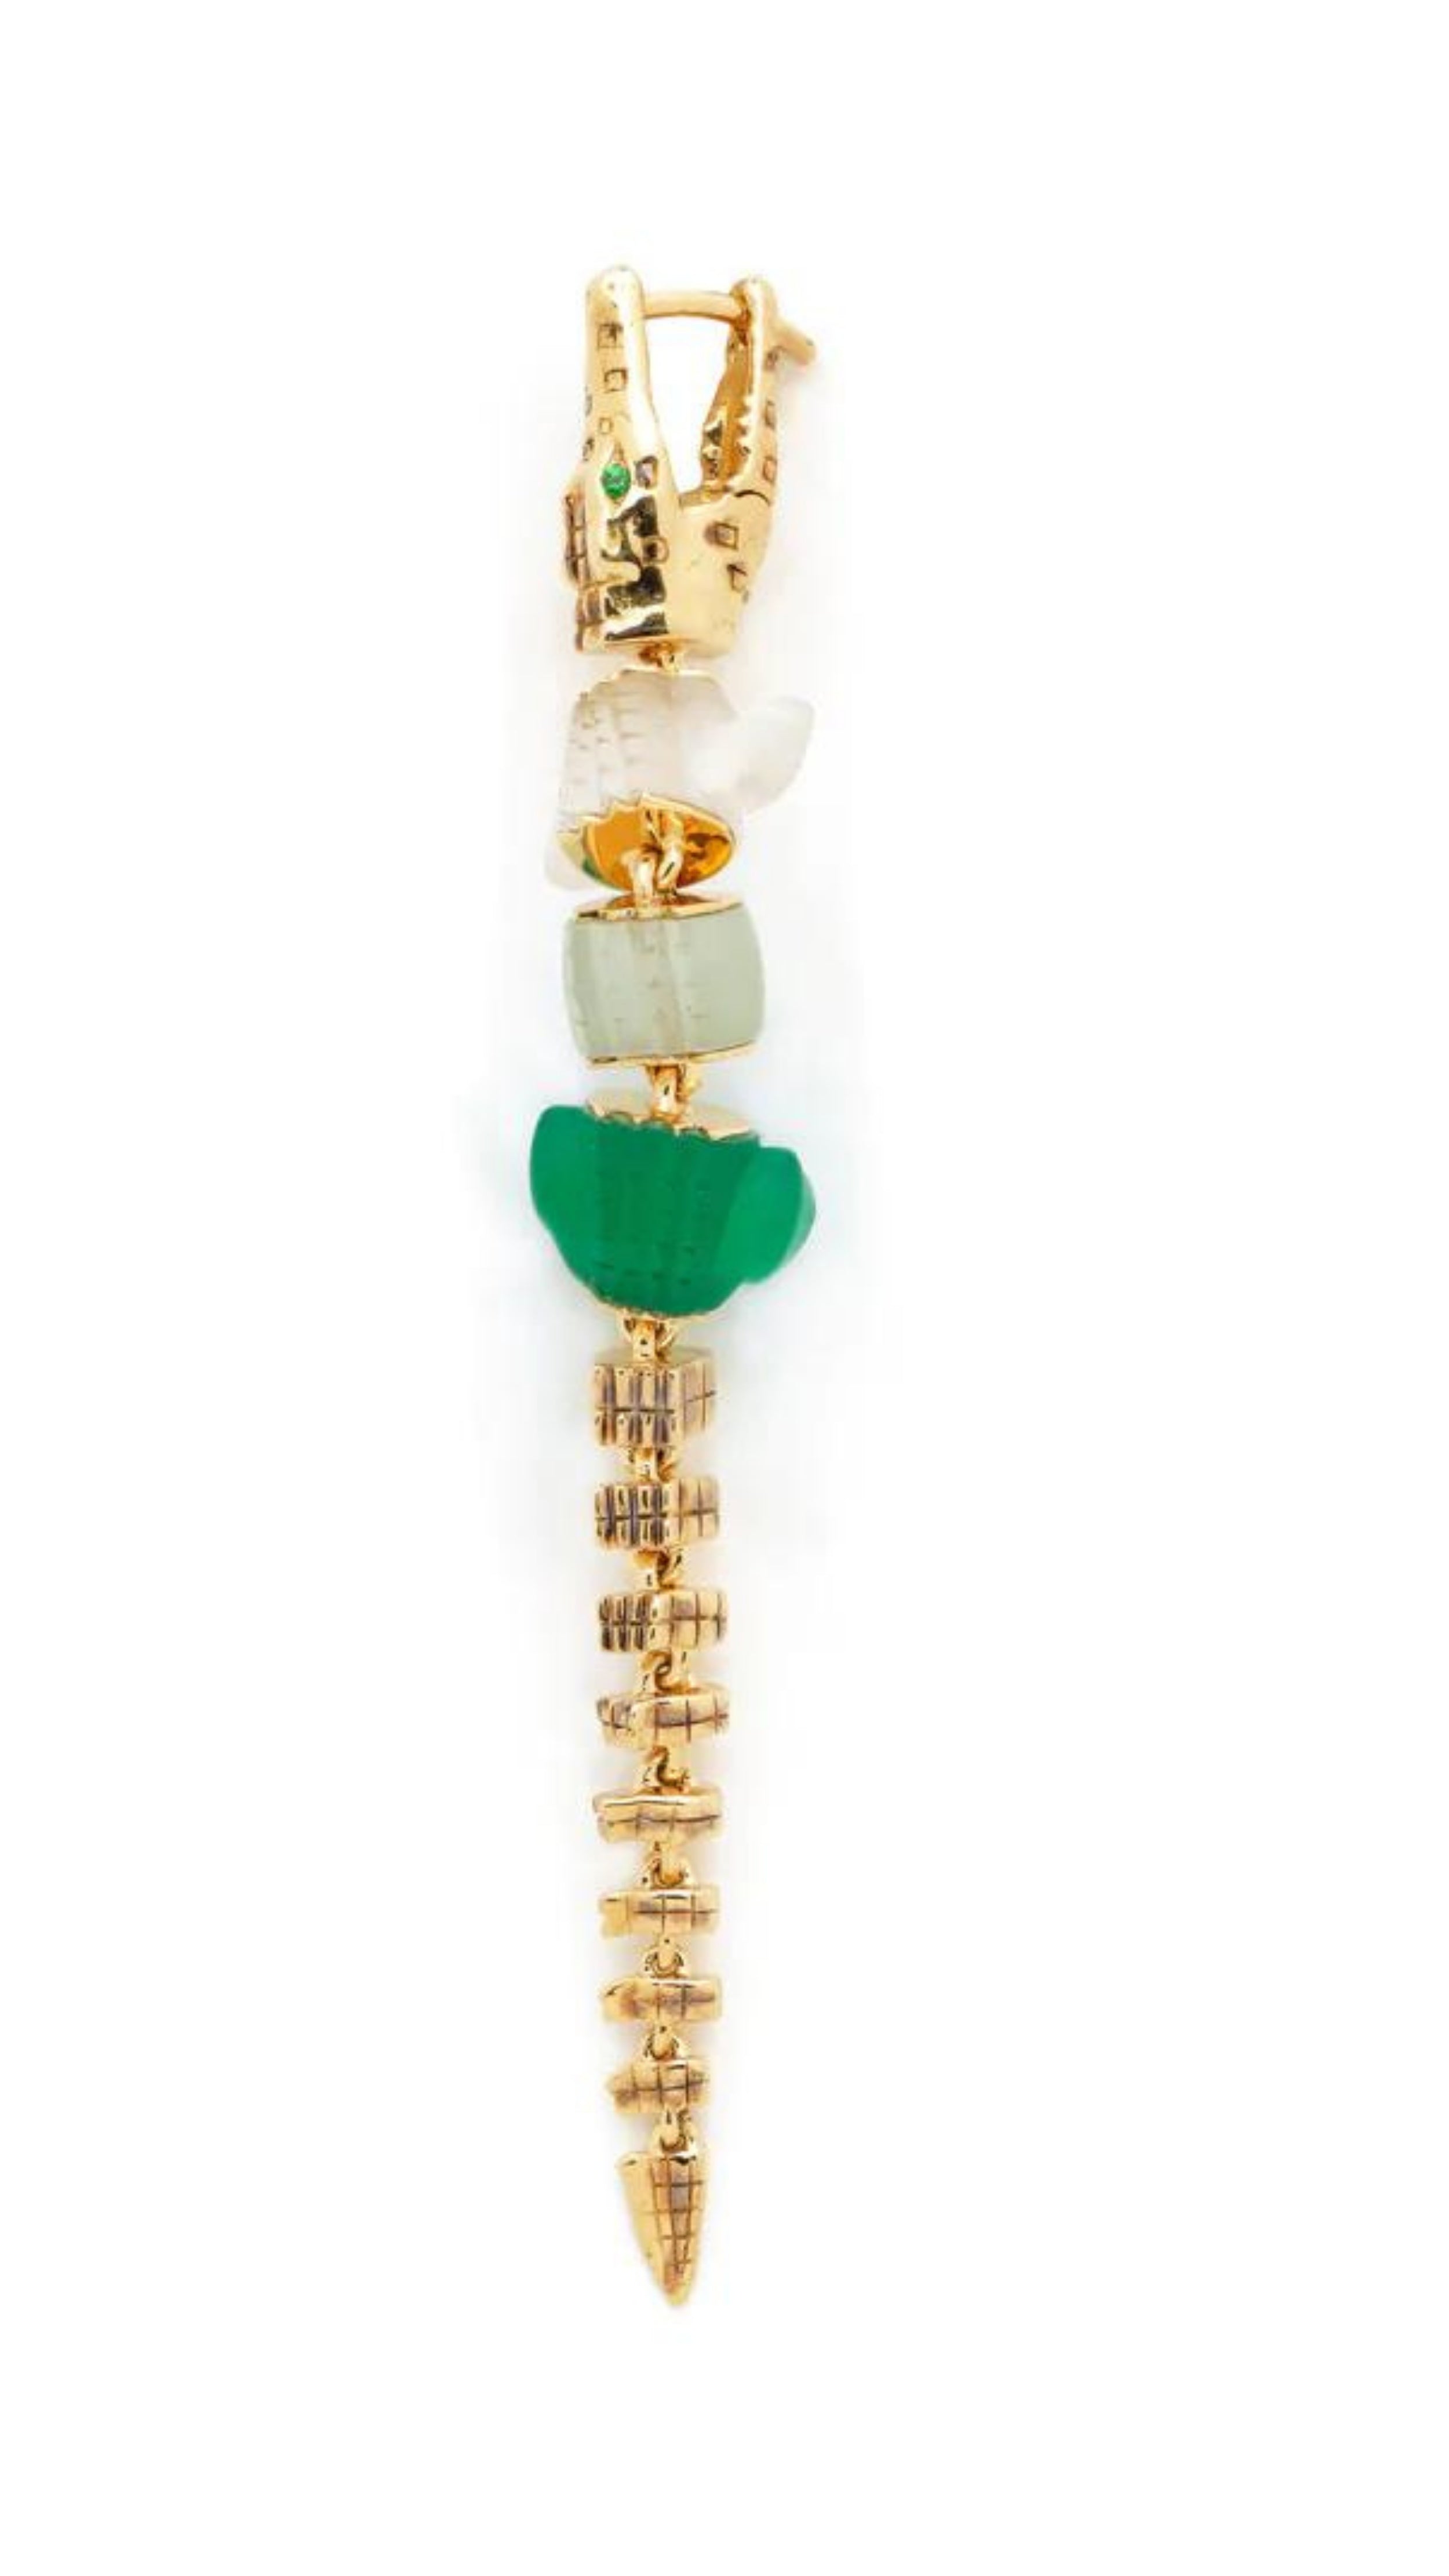 Bibi van der Velden Green Gradient Alligator Vertebrae Bite Earring. Crafted in 18K yellow gold, the alligator&#39;s body is formed by White Quartz, Green Amethyst, Green Agate while the head and tail are in solid 18K gold.  Photo shows earring from above.